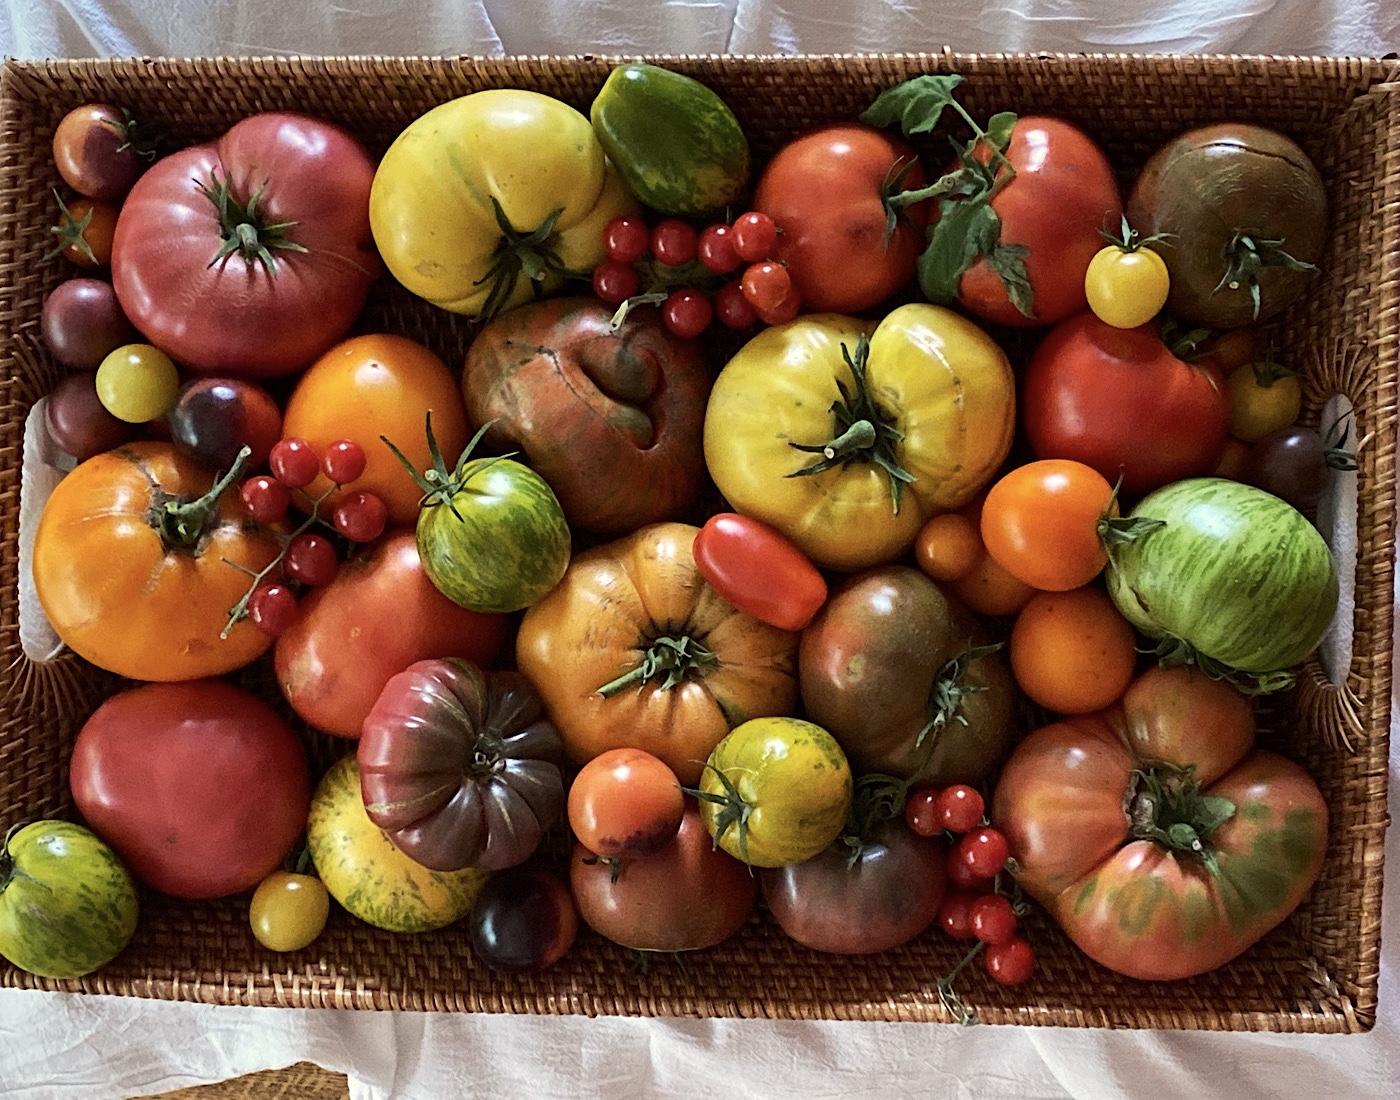 Discover a New Variety: Come Share Your Thoughts About Unusual Beefsteaks With Stripes!